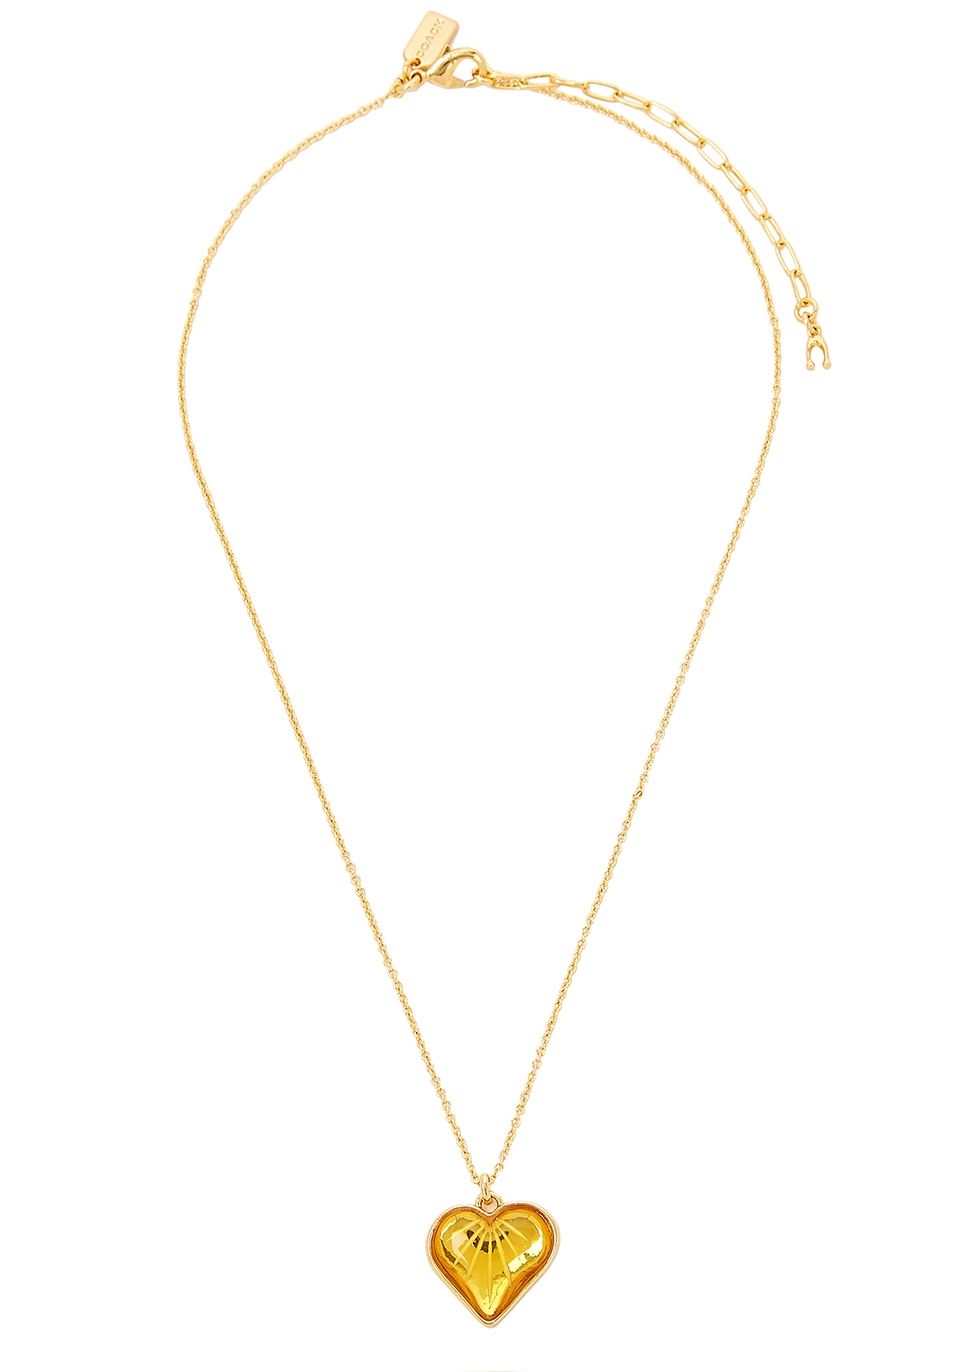 Gold-tone heart necklace